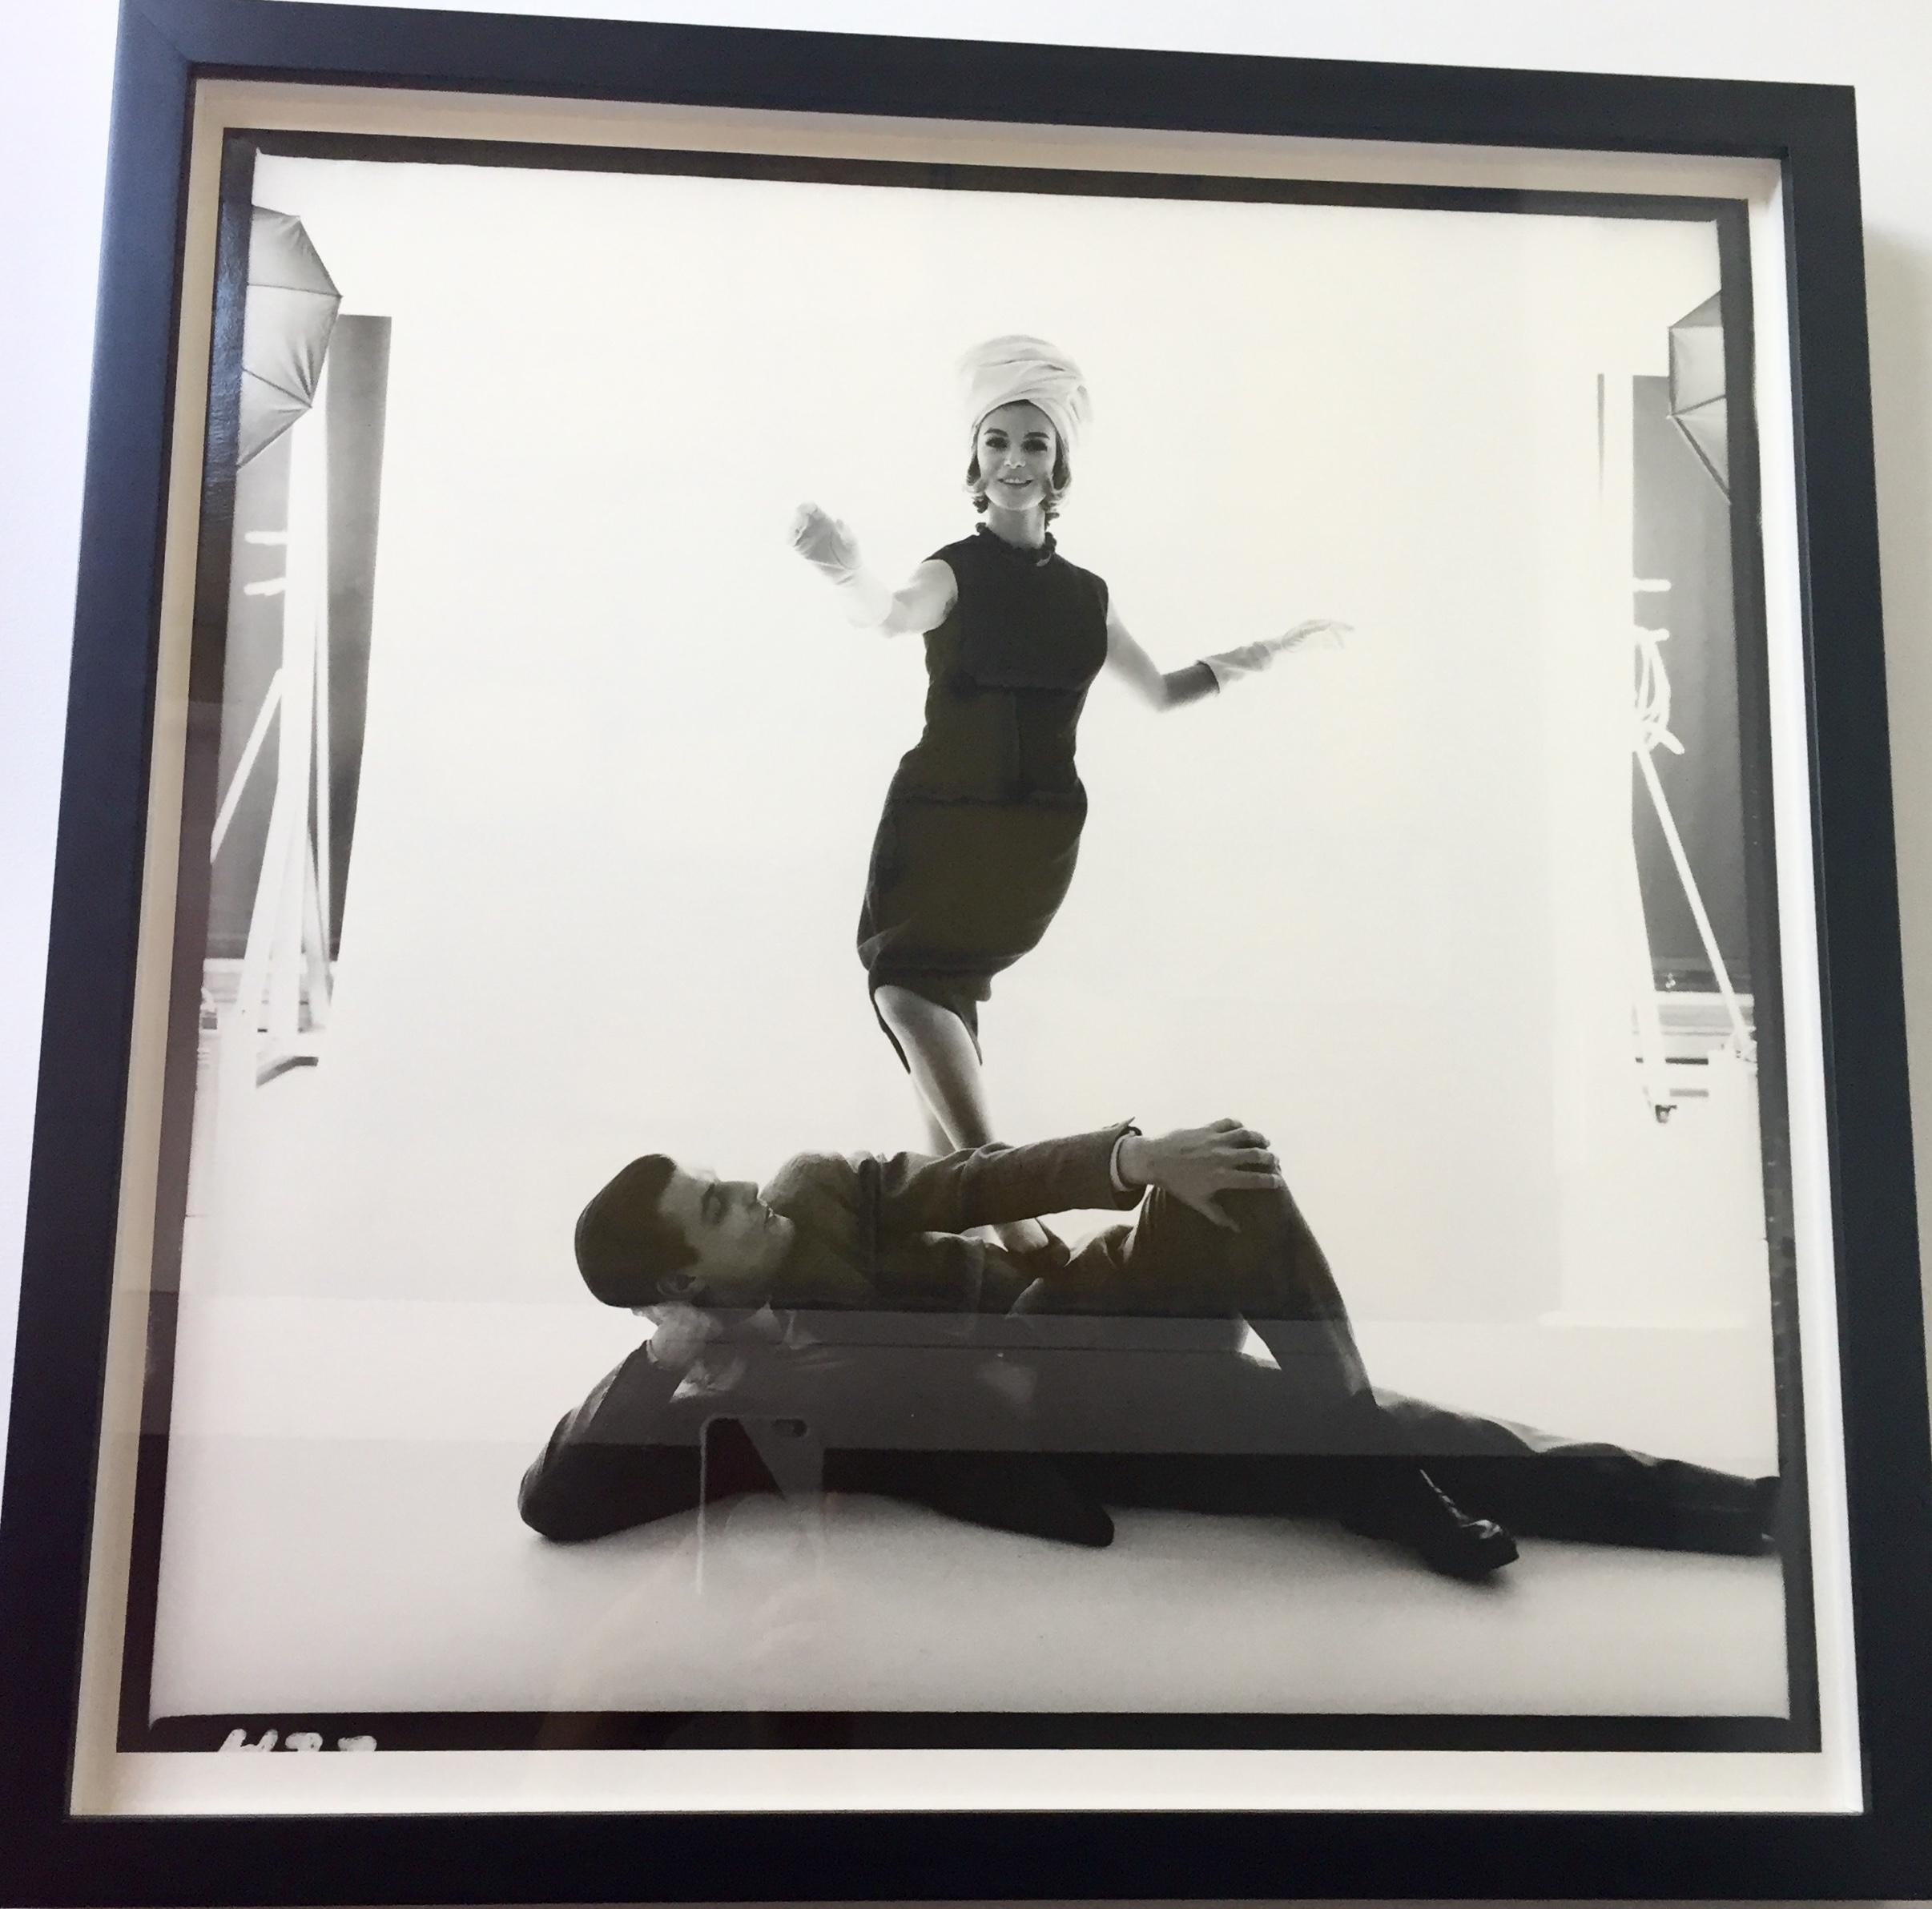 The Pianist Peter Duchin Posting with Model (i), 1963
Vintage Vogue
Gelatin Silver Print
Bert Stern, The Original Mad Man
Photographers of the 20th Century 
1960's Fashion, Vogue 
19.6 x 19.6 in 
Edition 4 of 8 
$4,700
Authenticated and stamped by